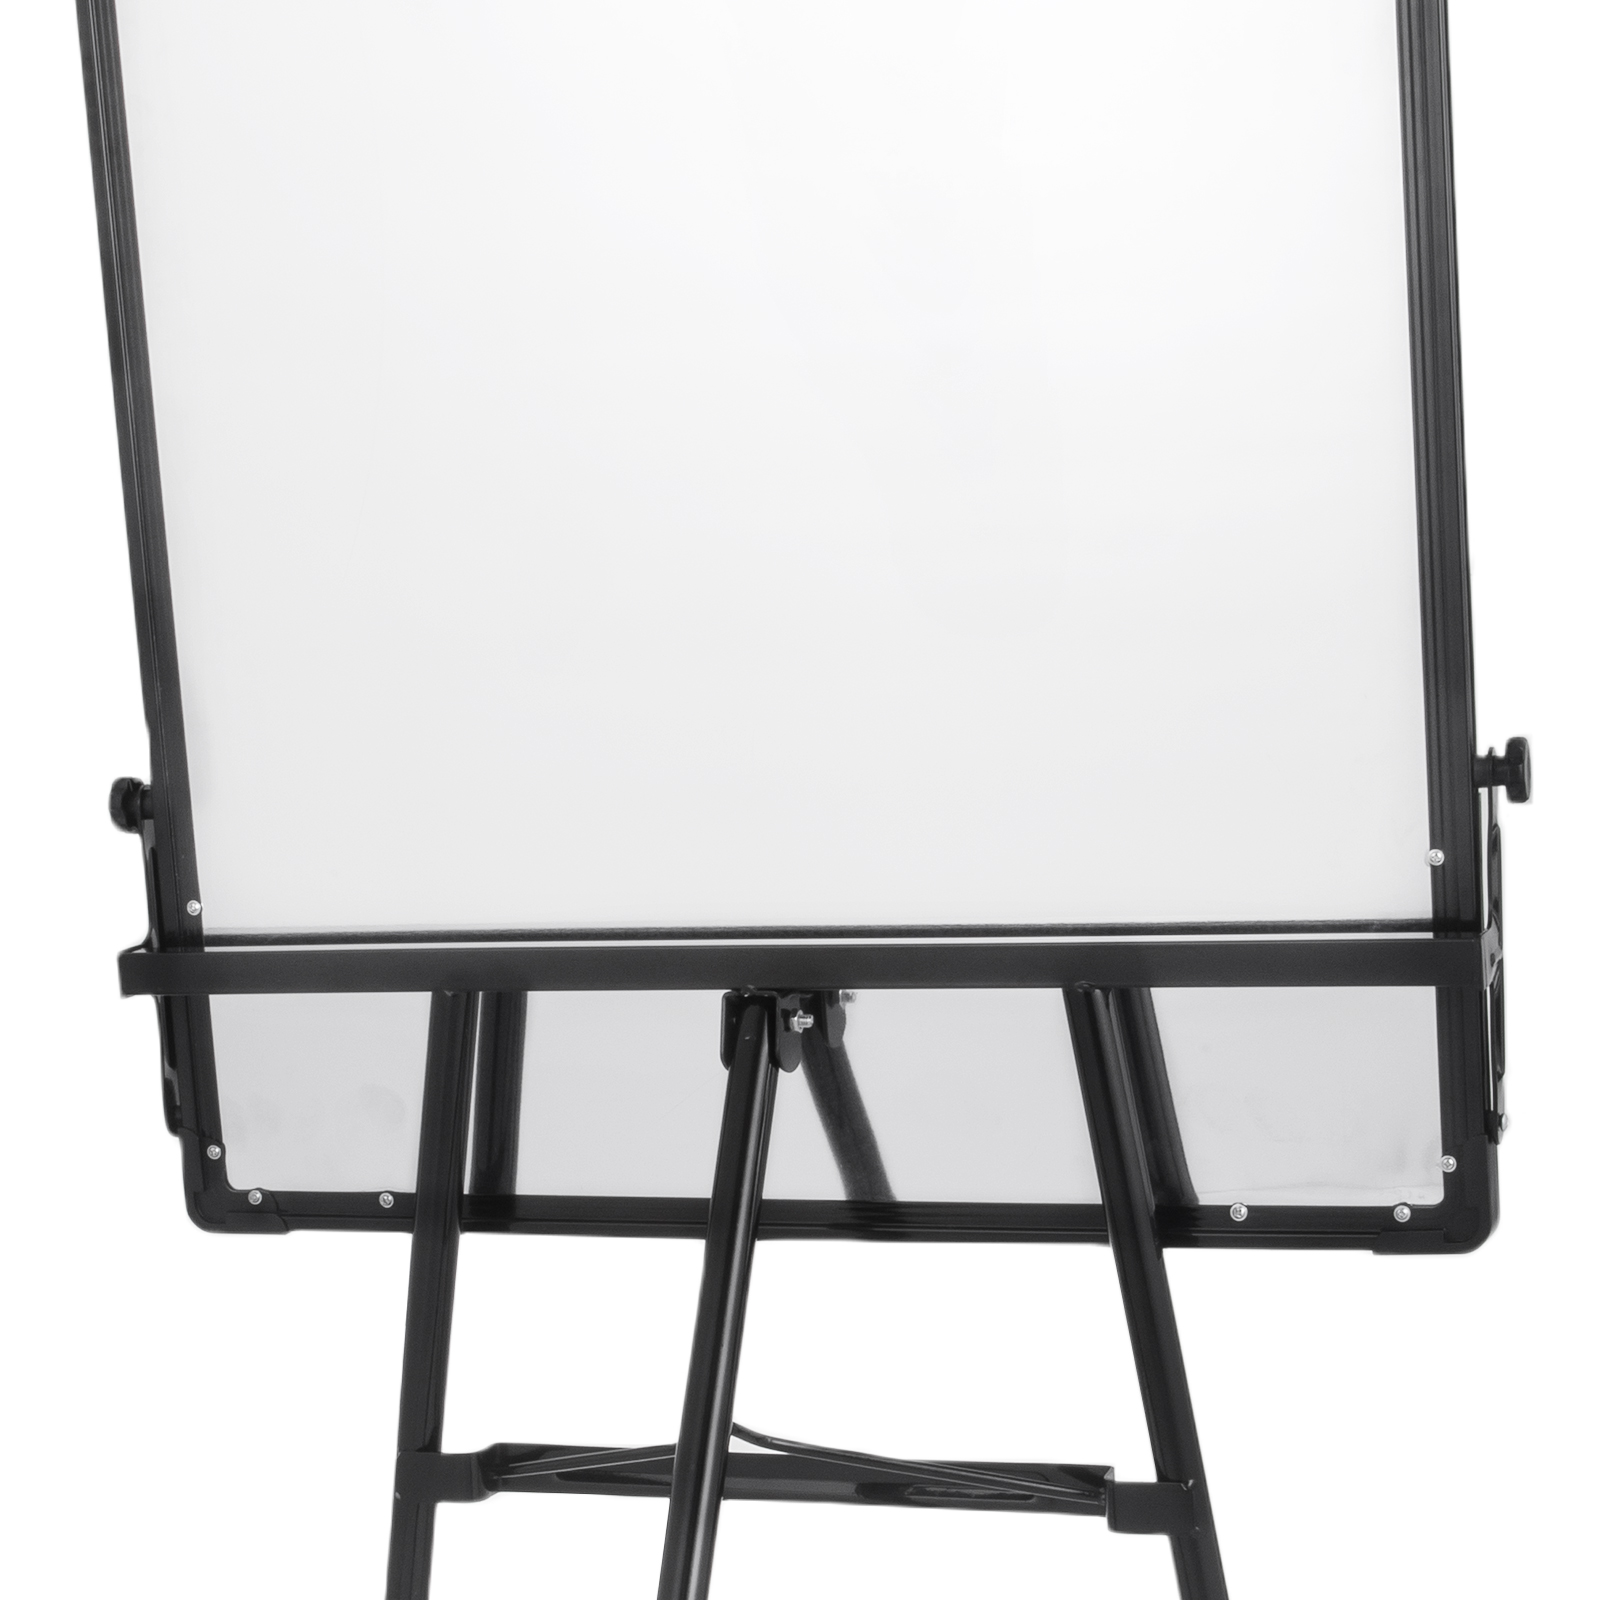 Magnetic Whiteboard Dry Erase Tripod U Stand Mobile Double/Single Side Office 